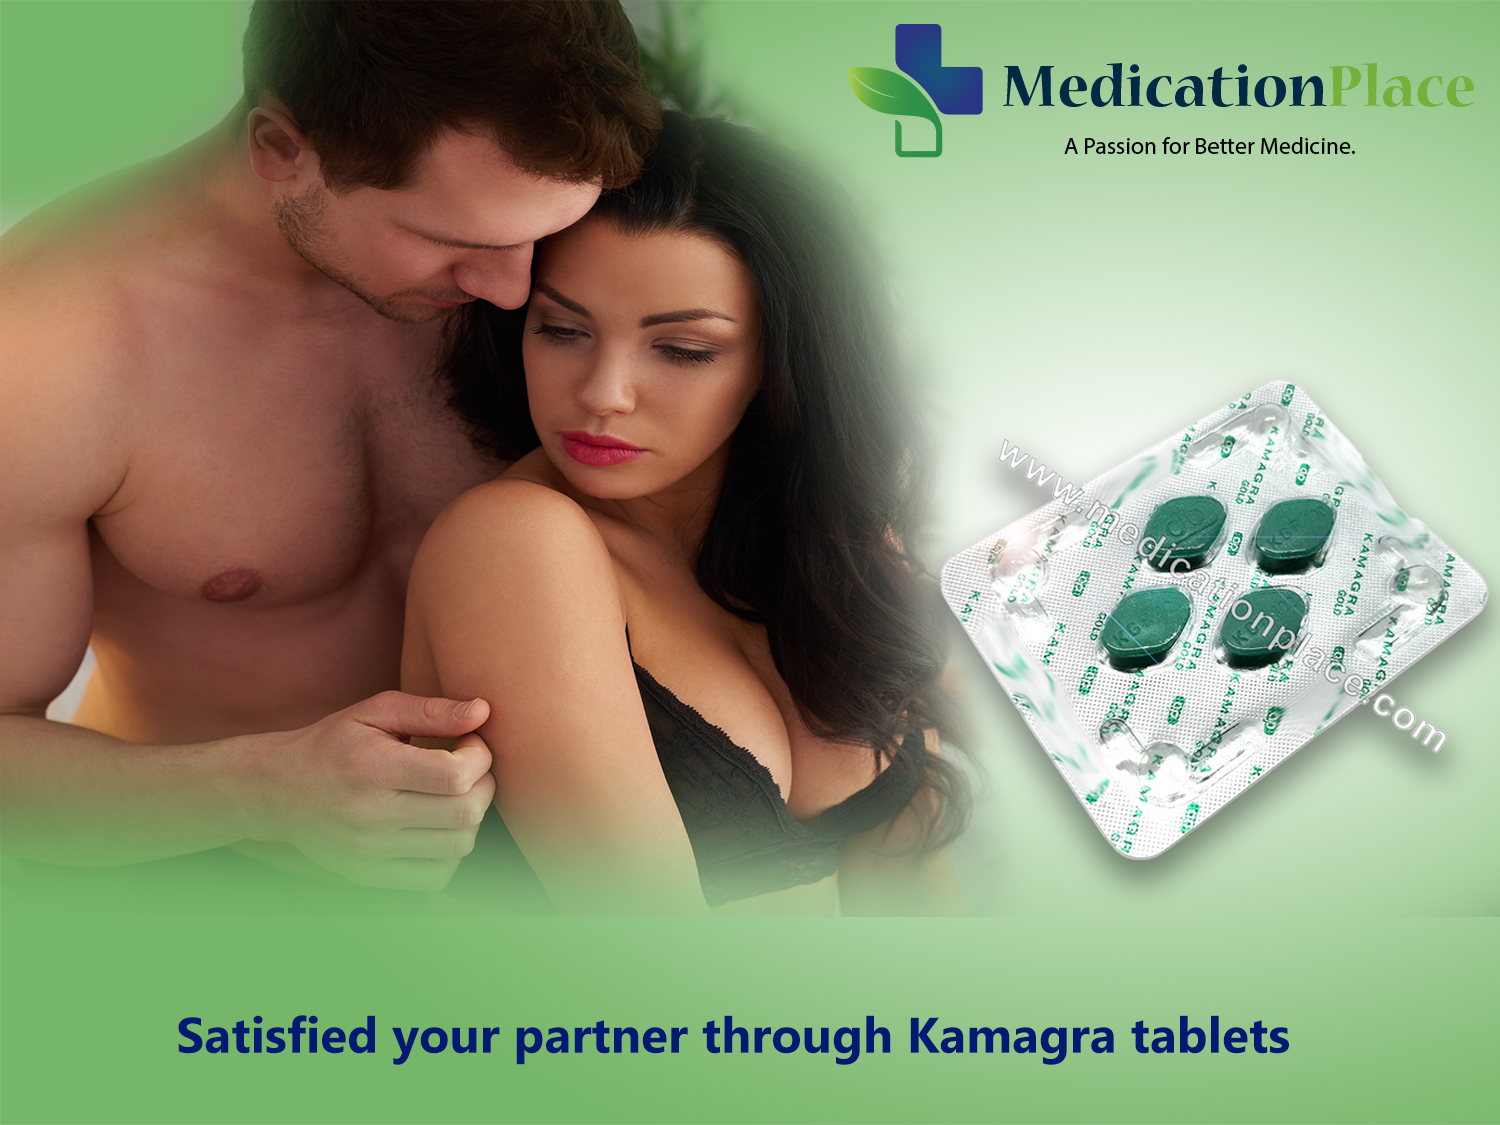 Satisfied Your Partner through Kamagra Tablets - Medicationplace